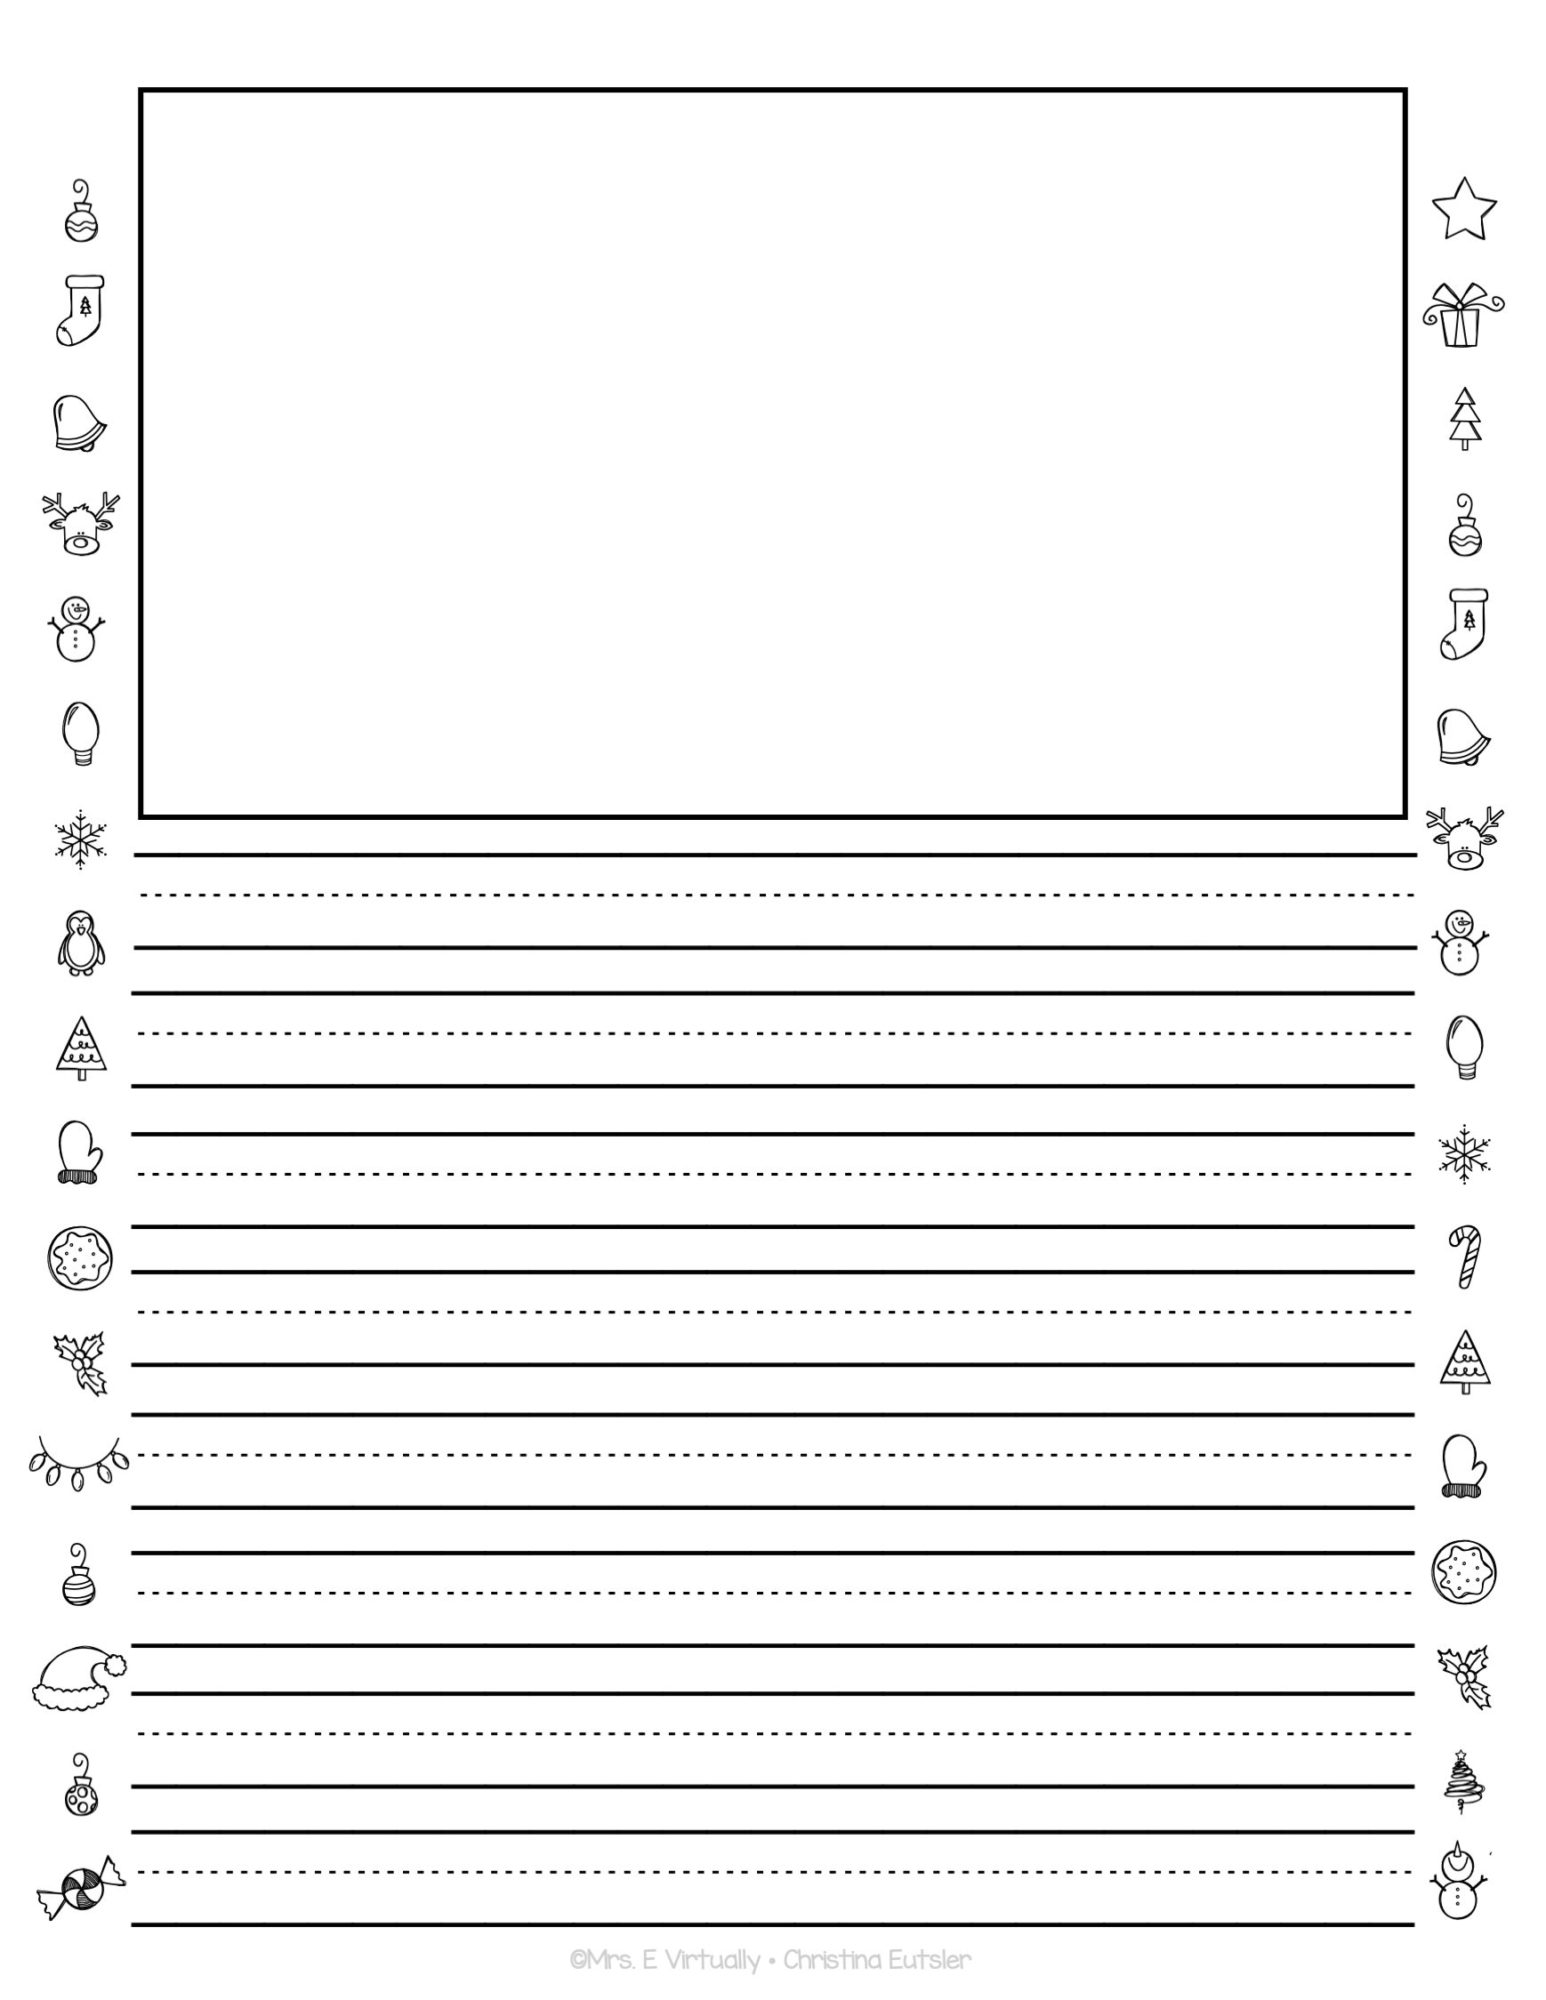 kindergarten-writing-paper-with-picture-box-mrs-e-virtually